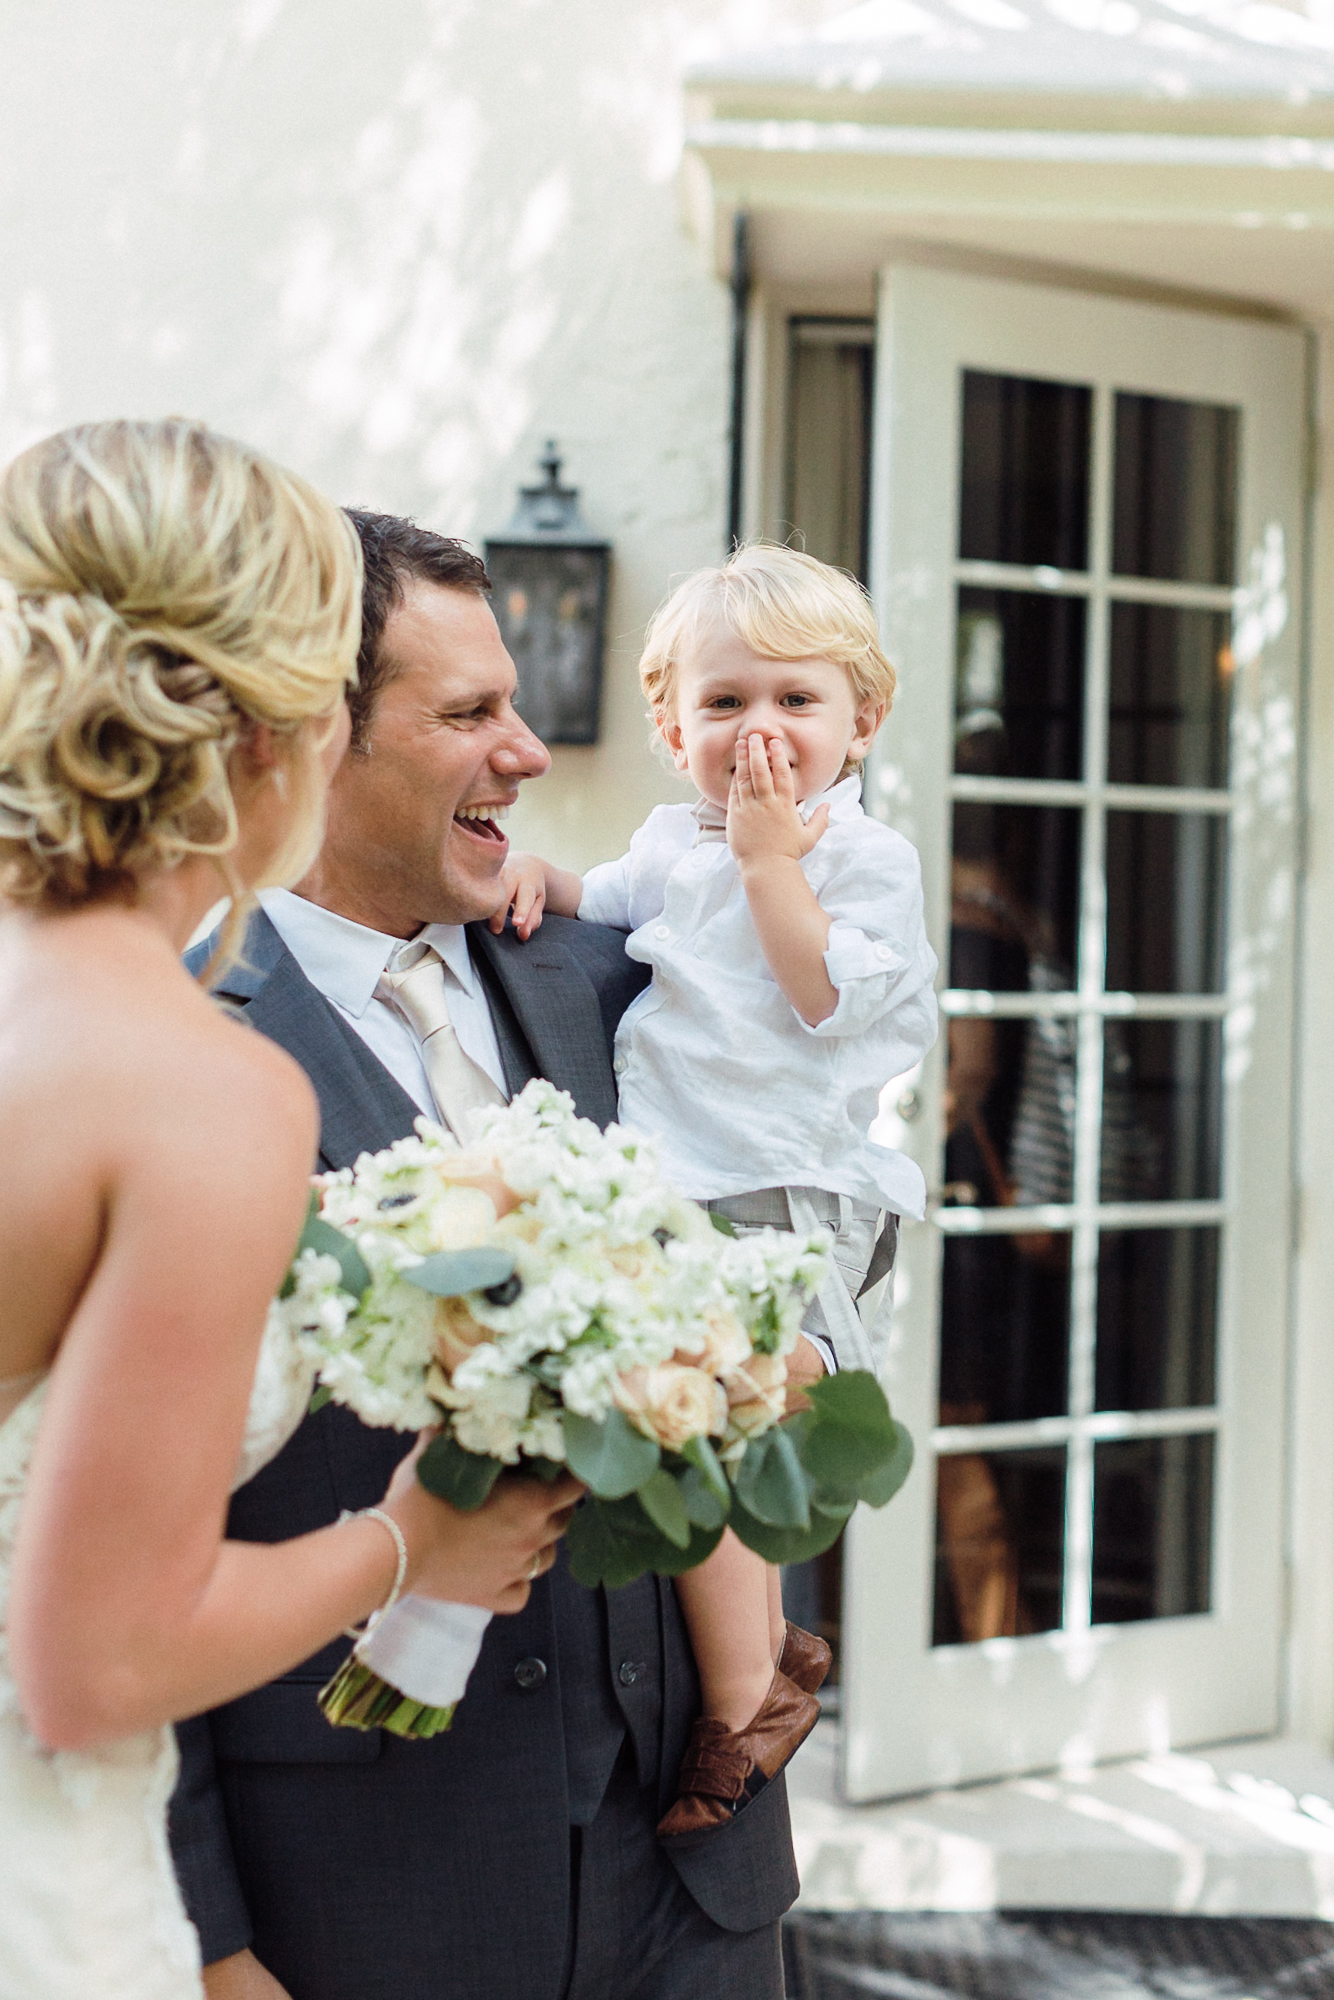 The cutest reaction from the ring bearer when he sees his mom and dad all dressed up and ready to get married!